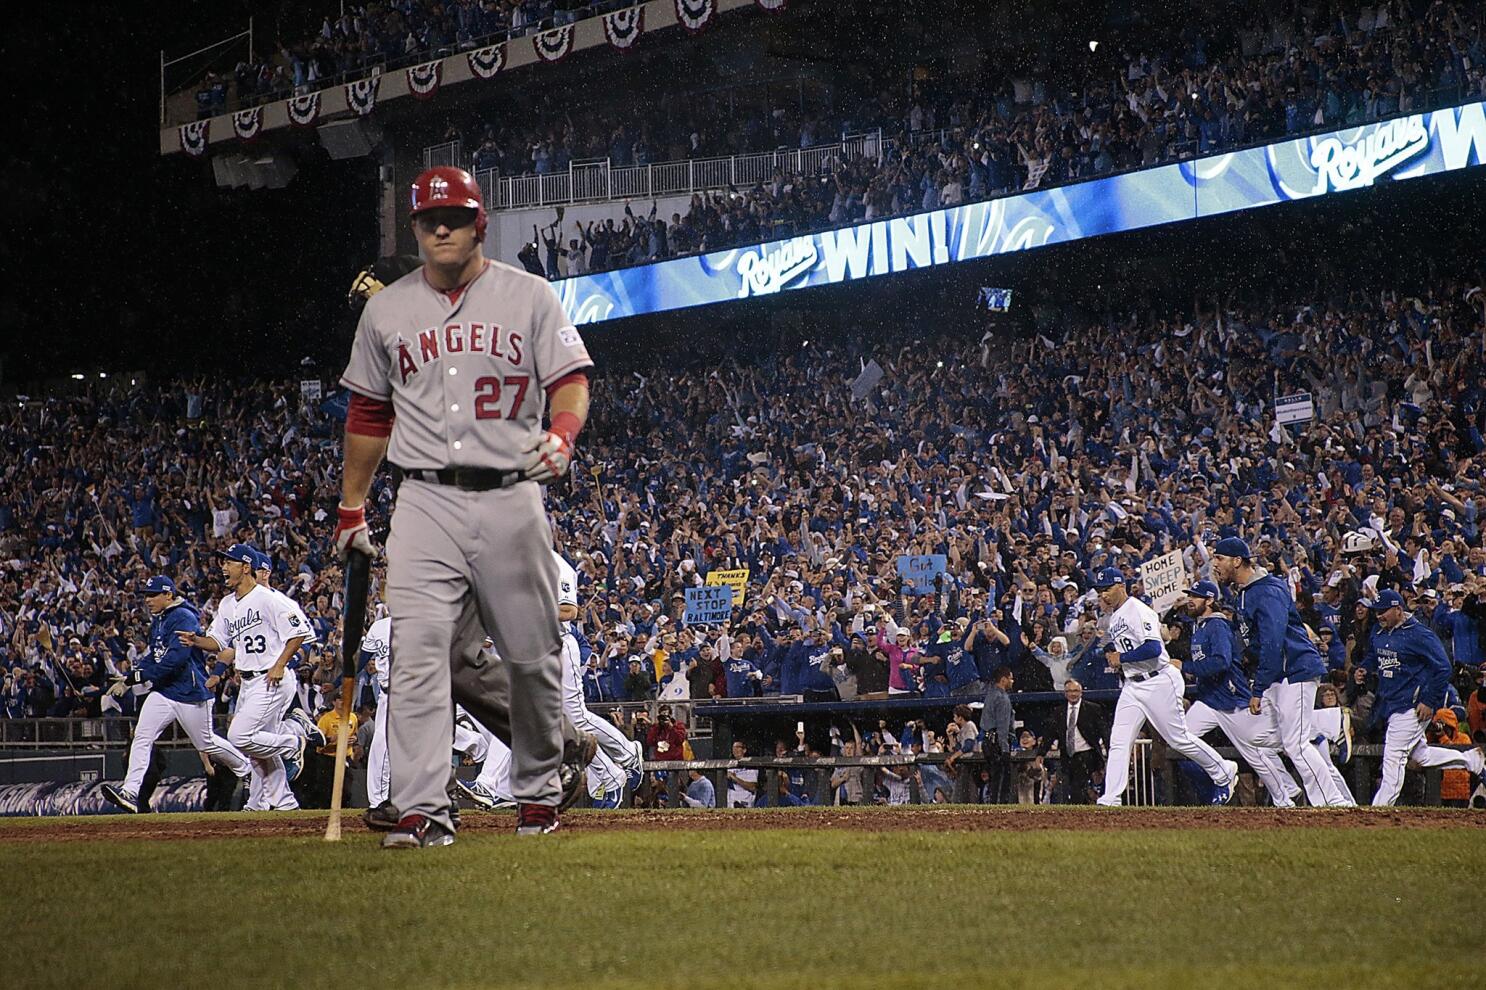 Angels' season ends in 8-3 ALDS loss to Royals - Los Angeles Times